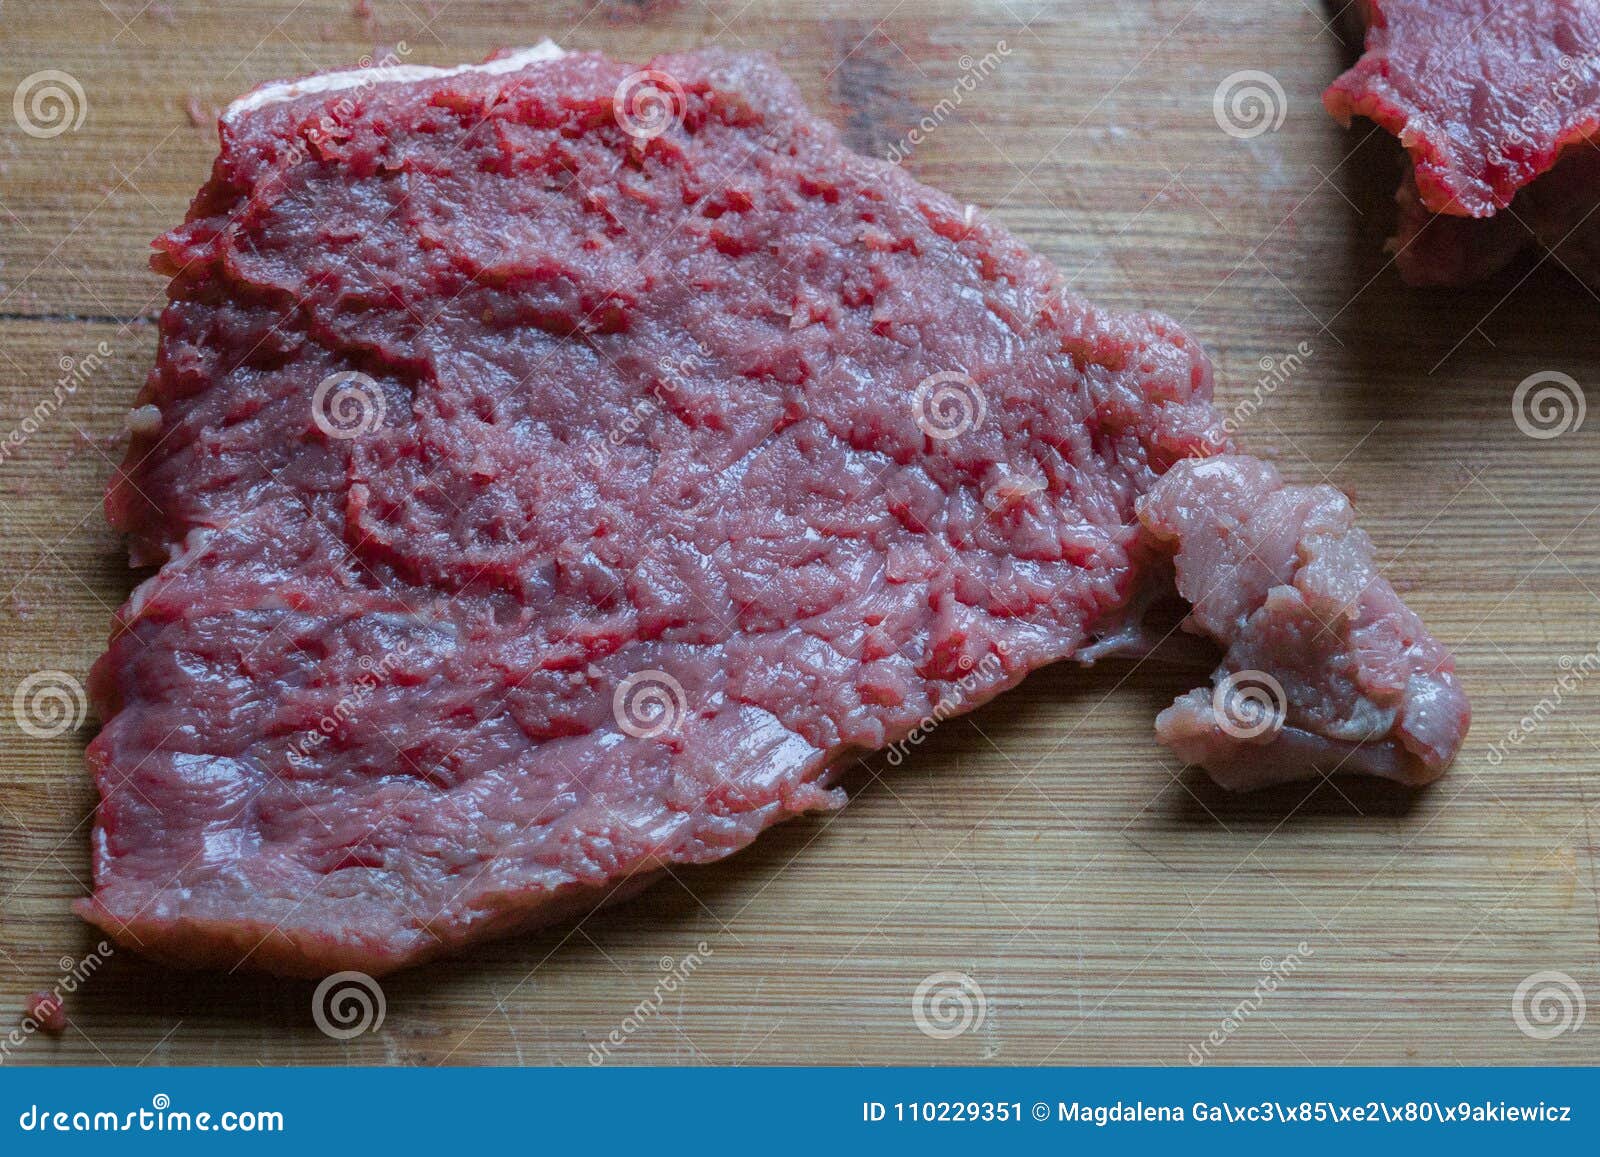 Raw Red Meat Beaf Stock Image Image Of Meat Food Chop